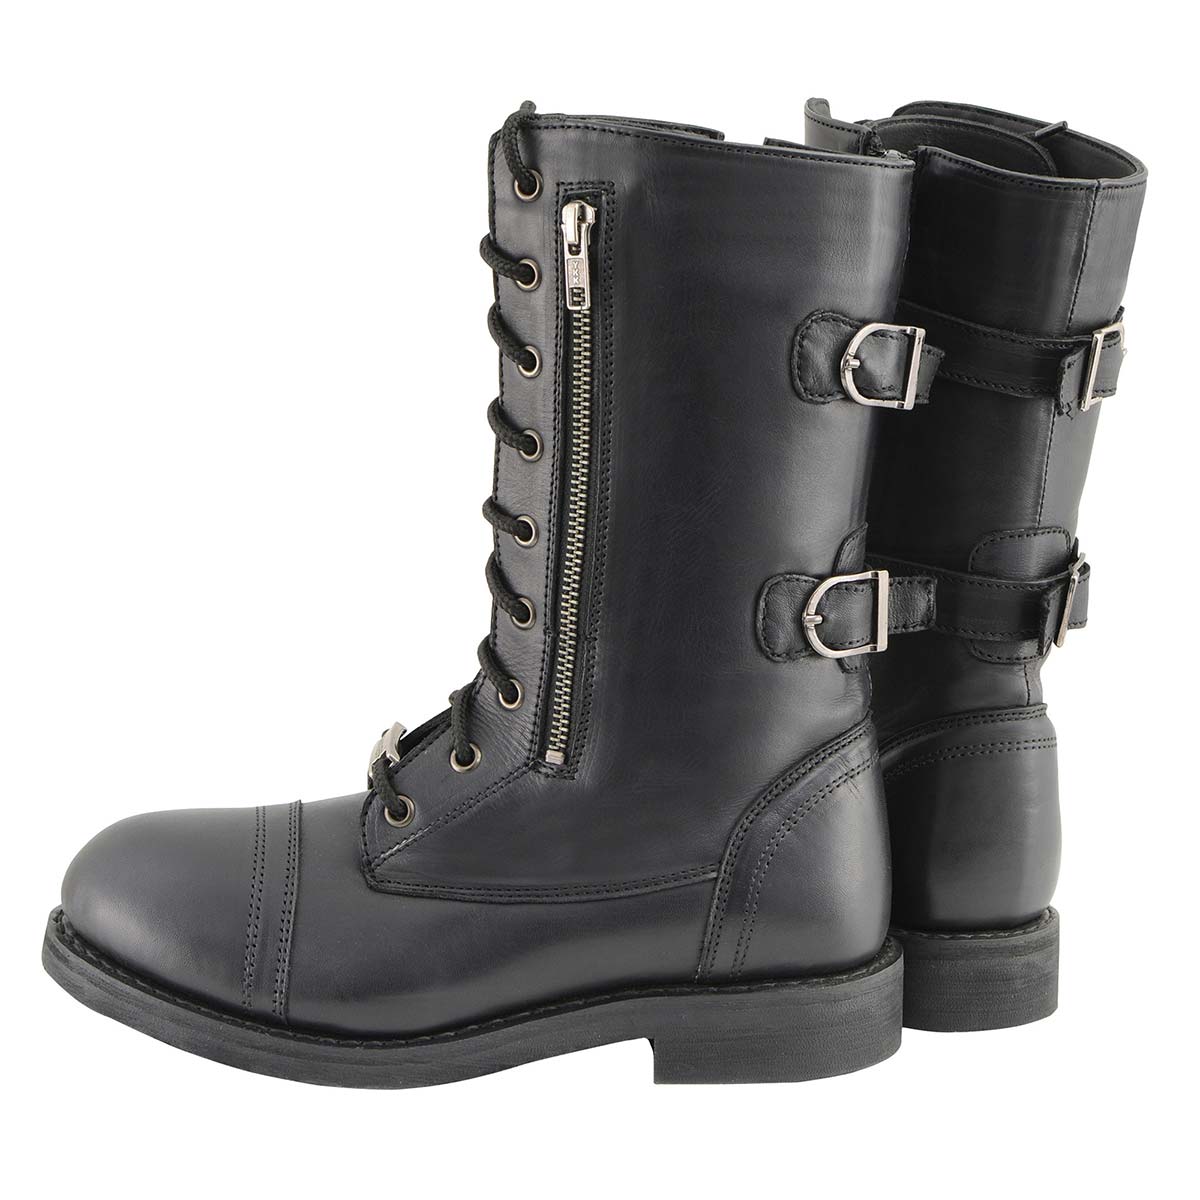 Milwaukee Leather MBL9369 Women's Black Tactical Lace-Up and Zipper Boots